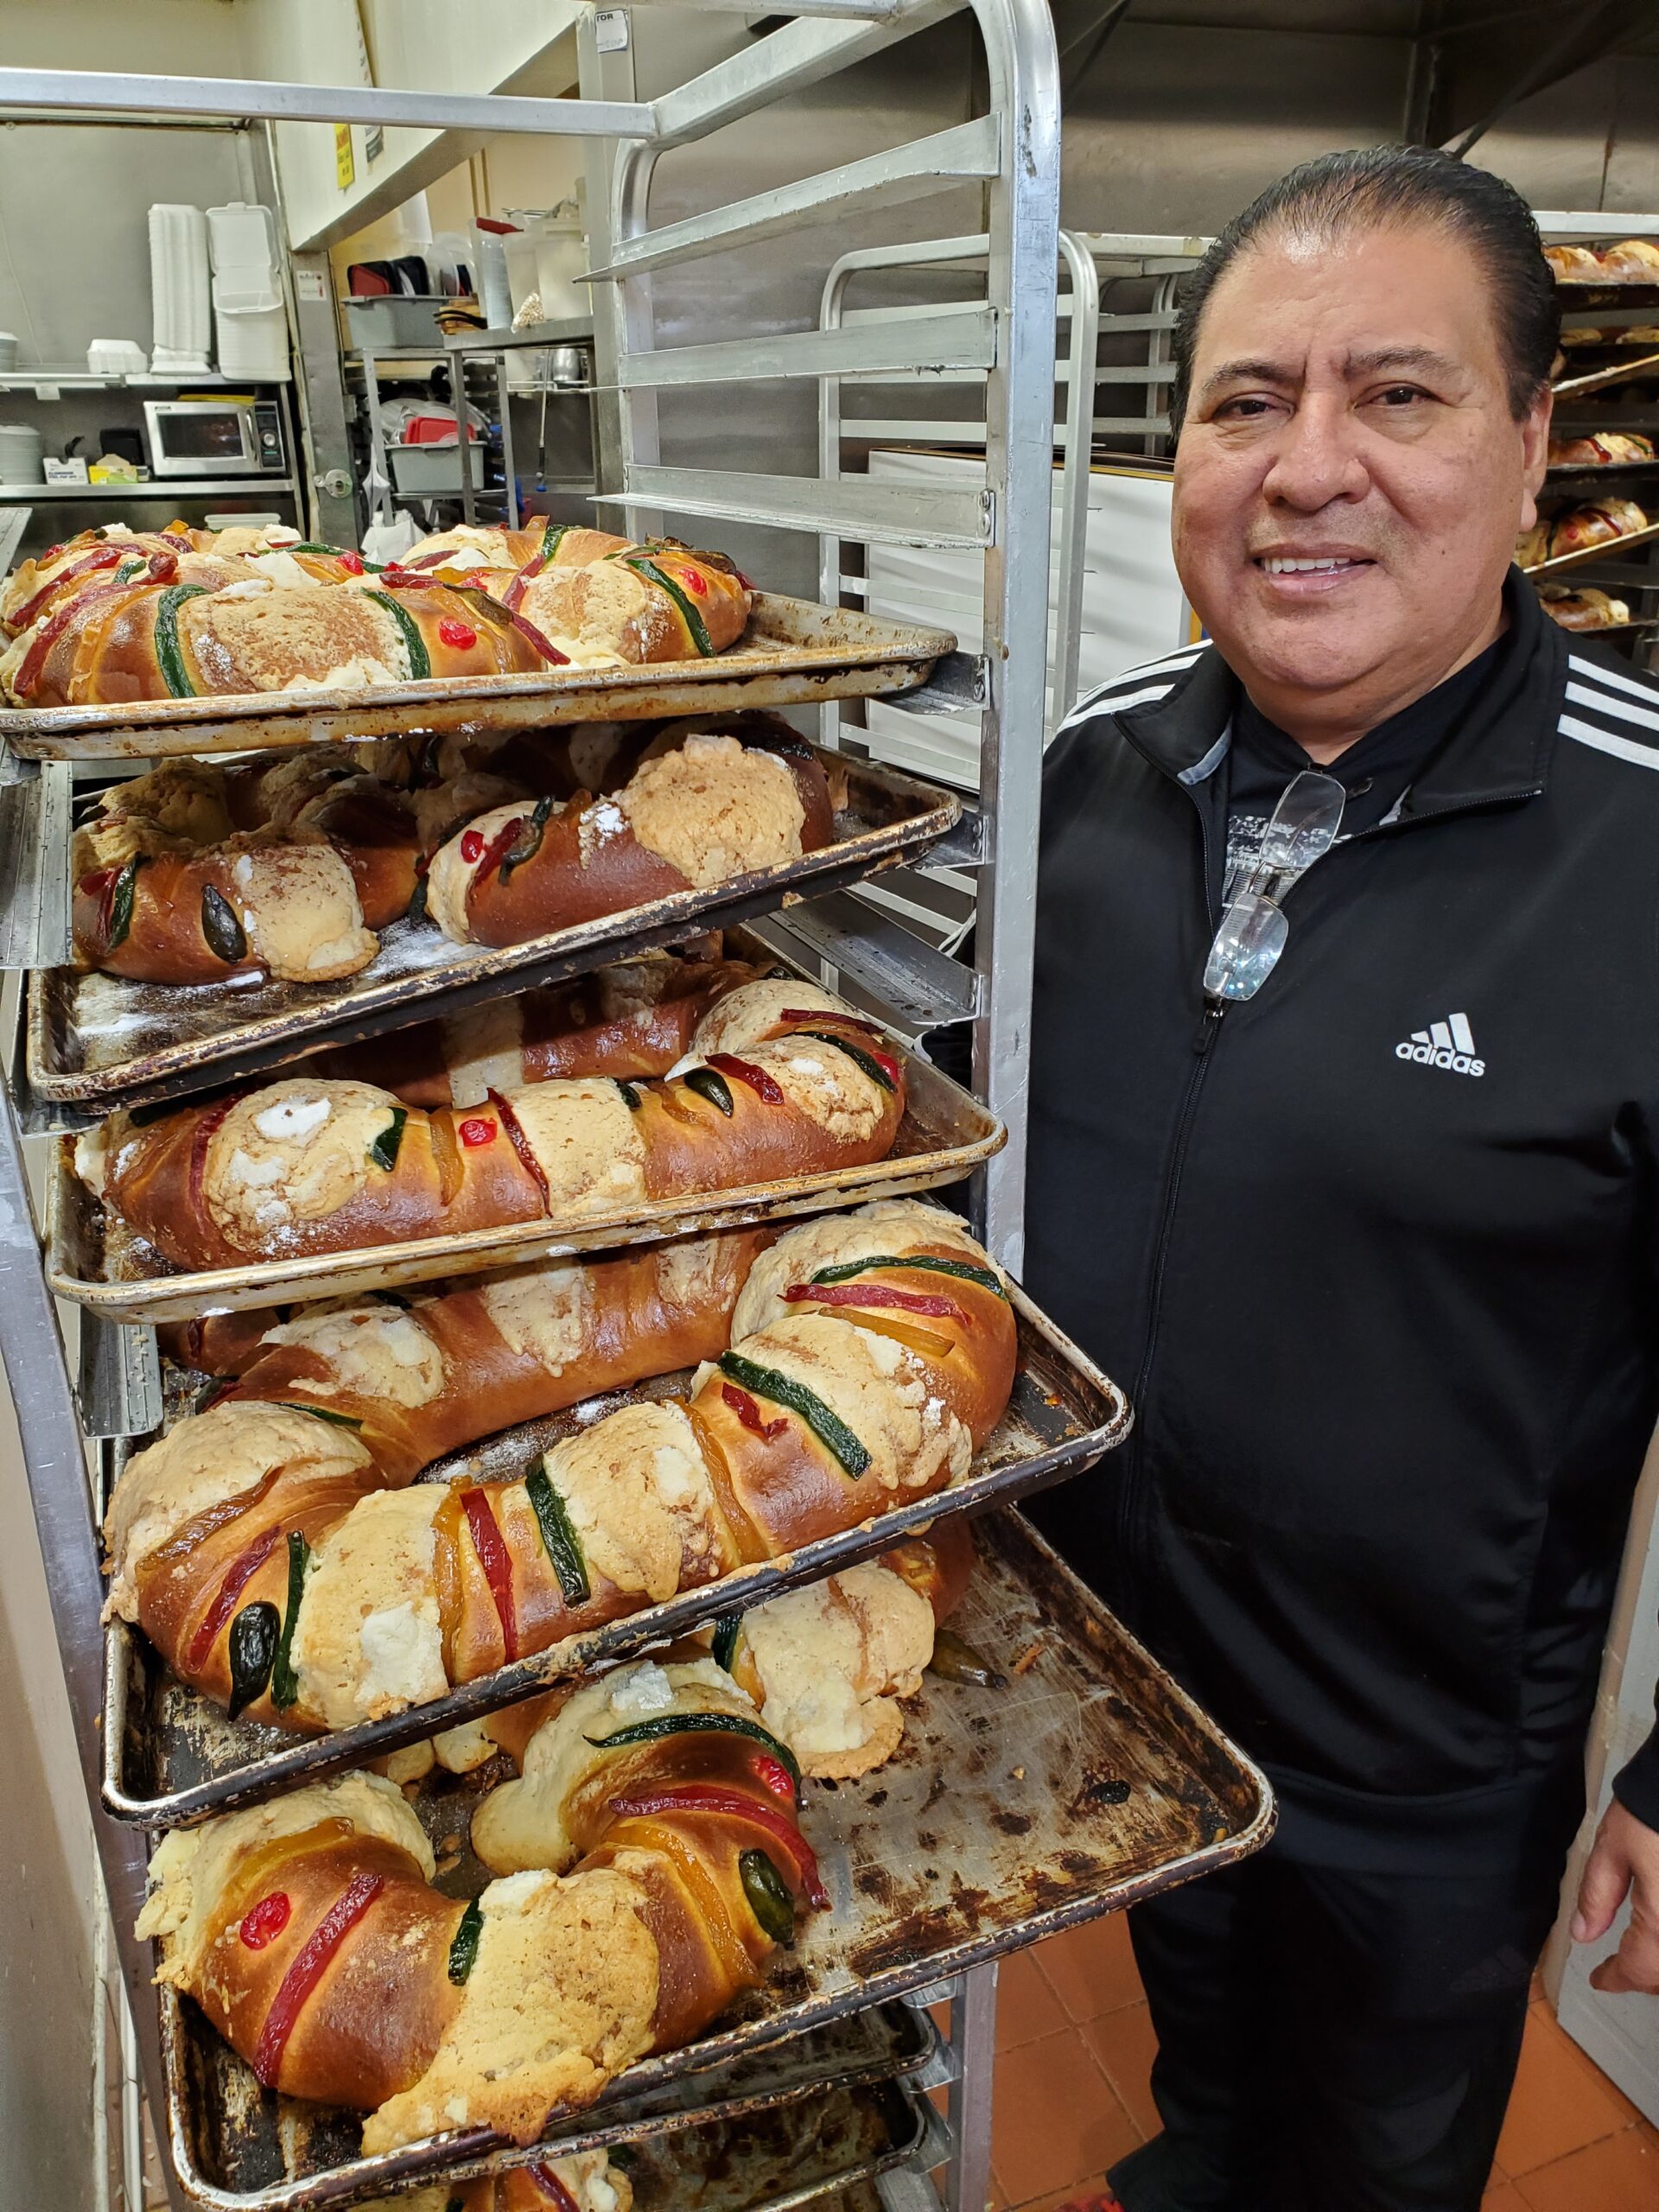 Man smiling in front of a rack of freshly baked bread